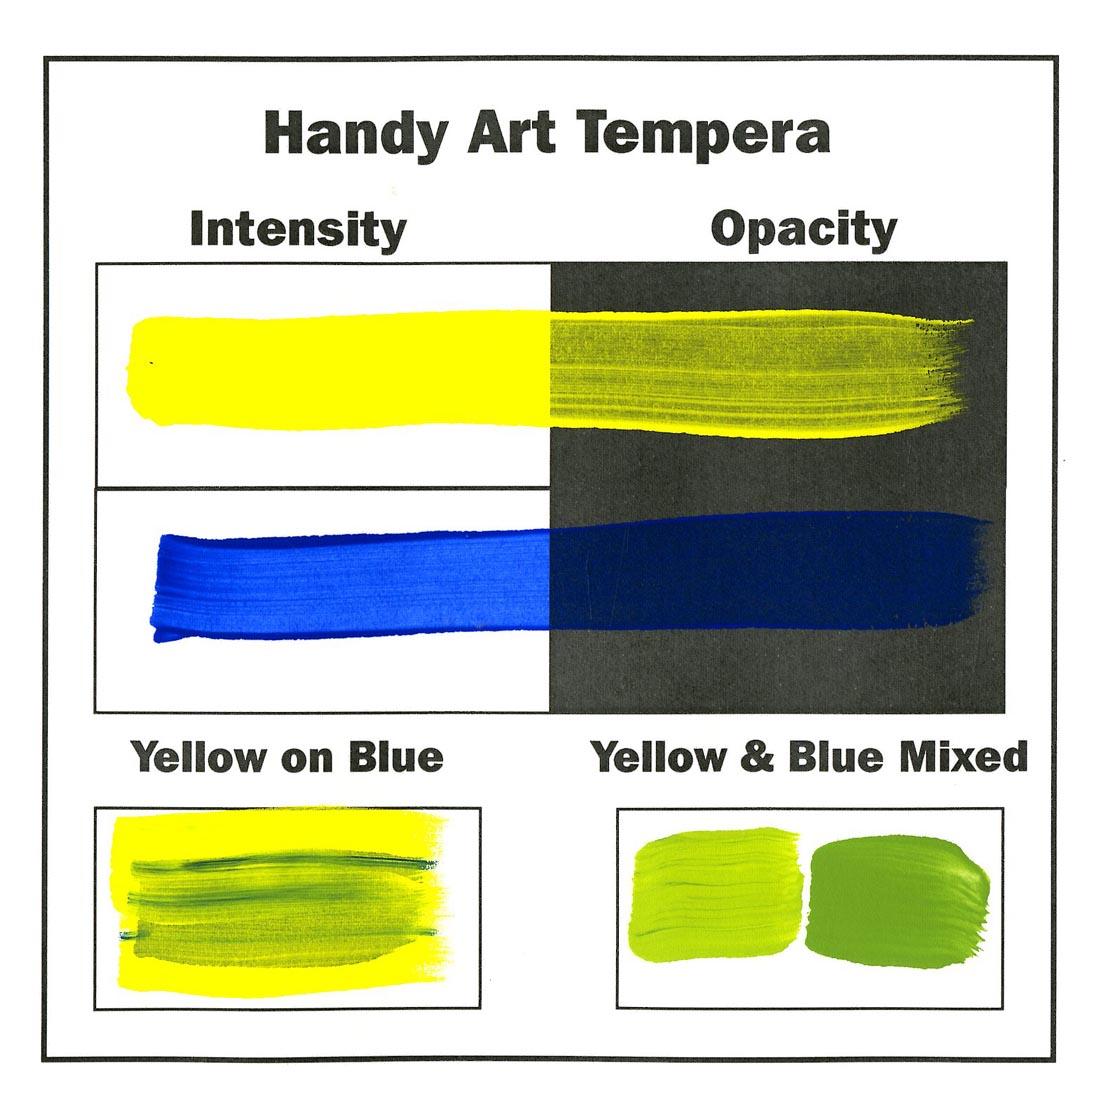 Swatches of blue and yellow Handy Art tempera paint, showing intensity and opacity, plus yellow over blue, and blue & yellow mixed